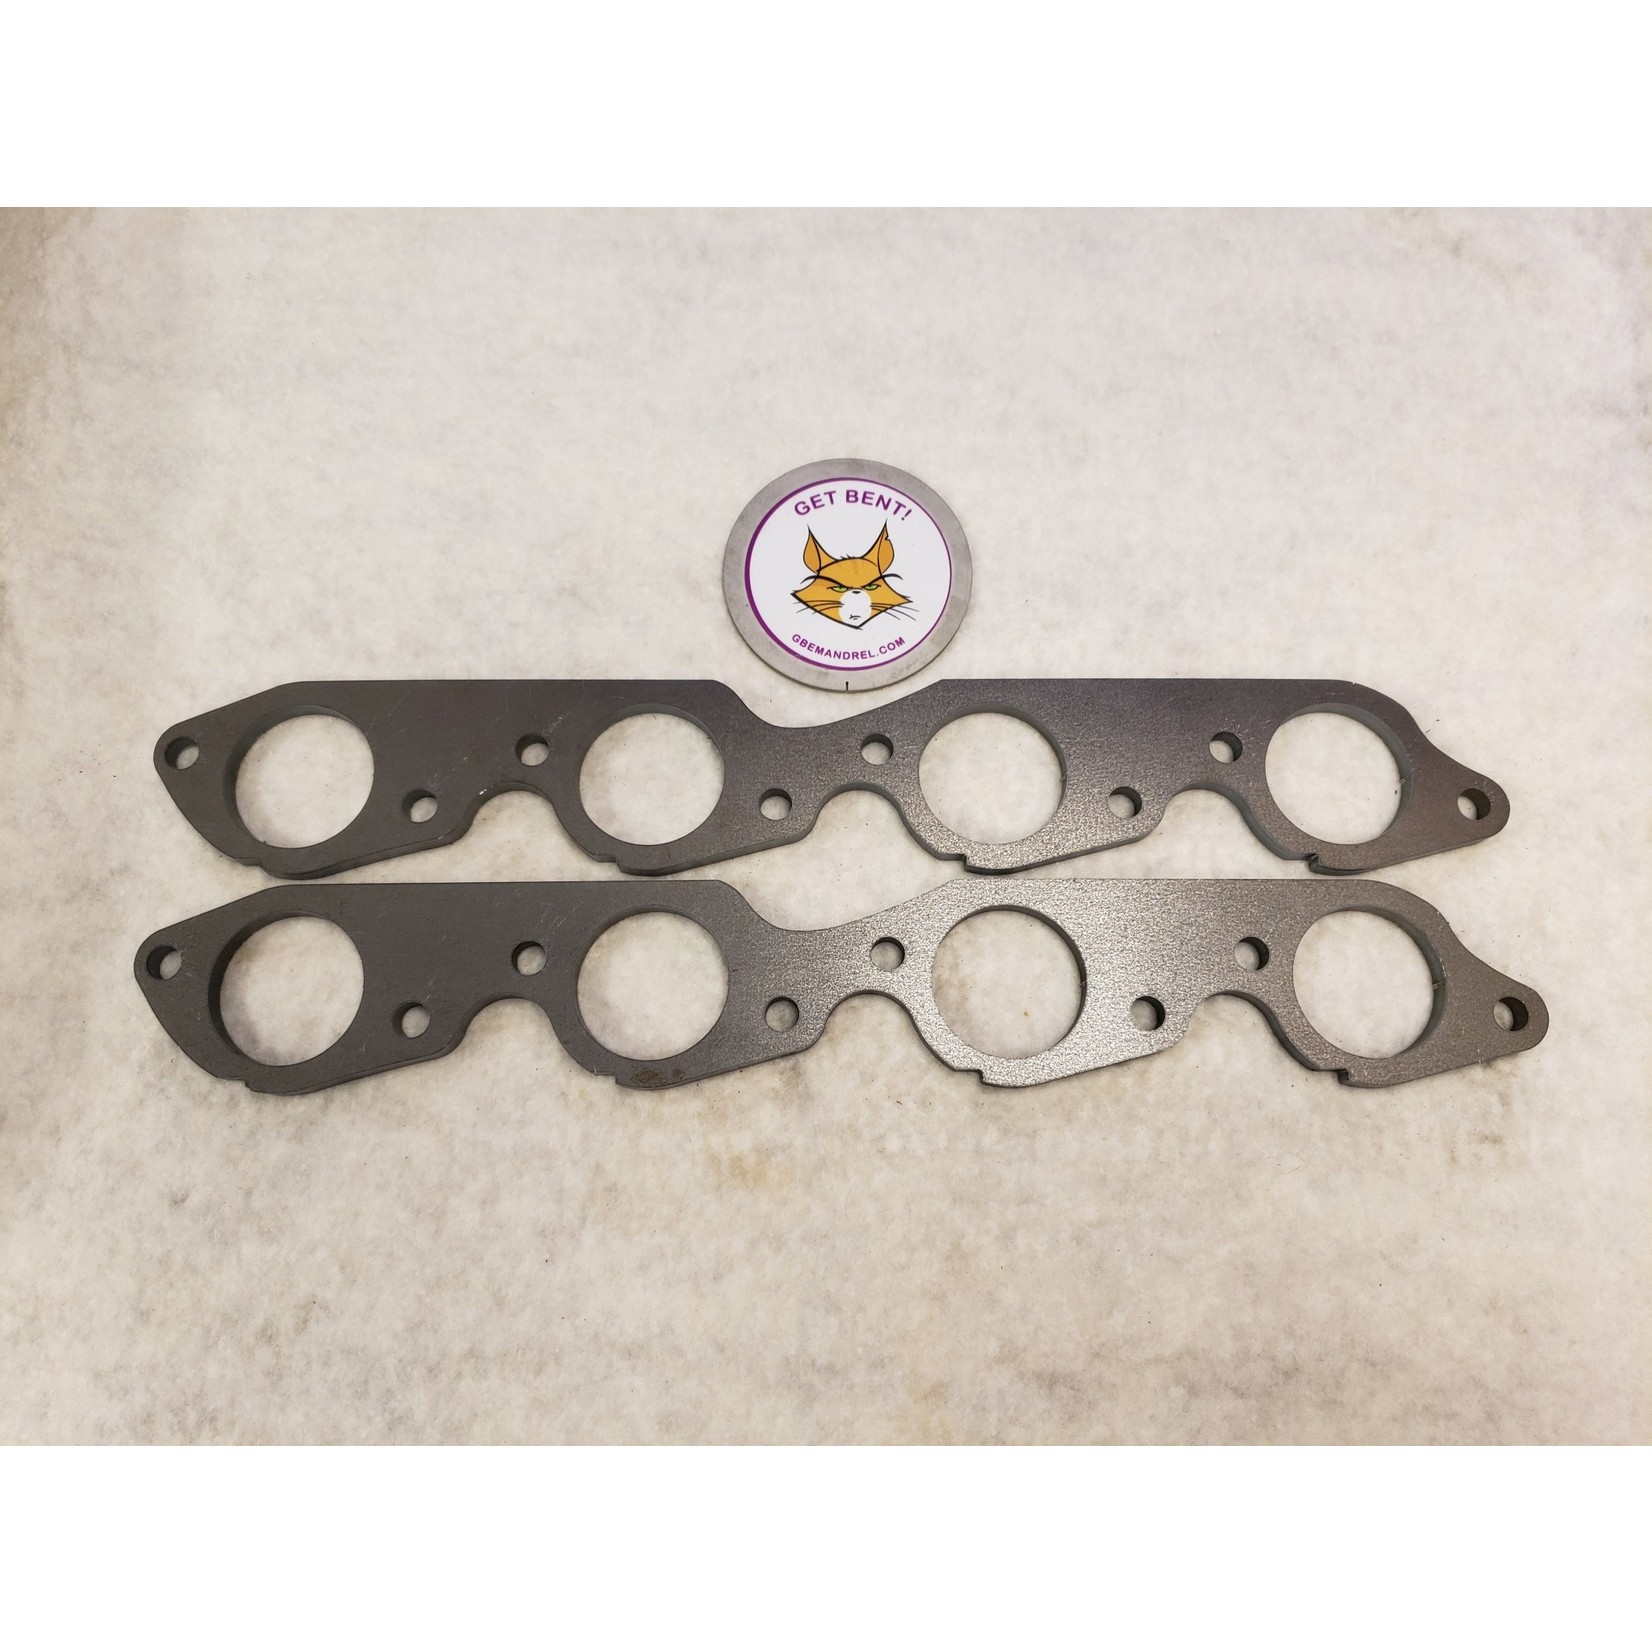 GBE GM CHEVY 366-502 BBC STEEL HEADER FLANGES